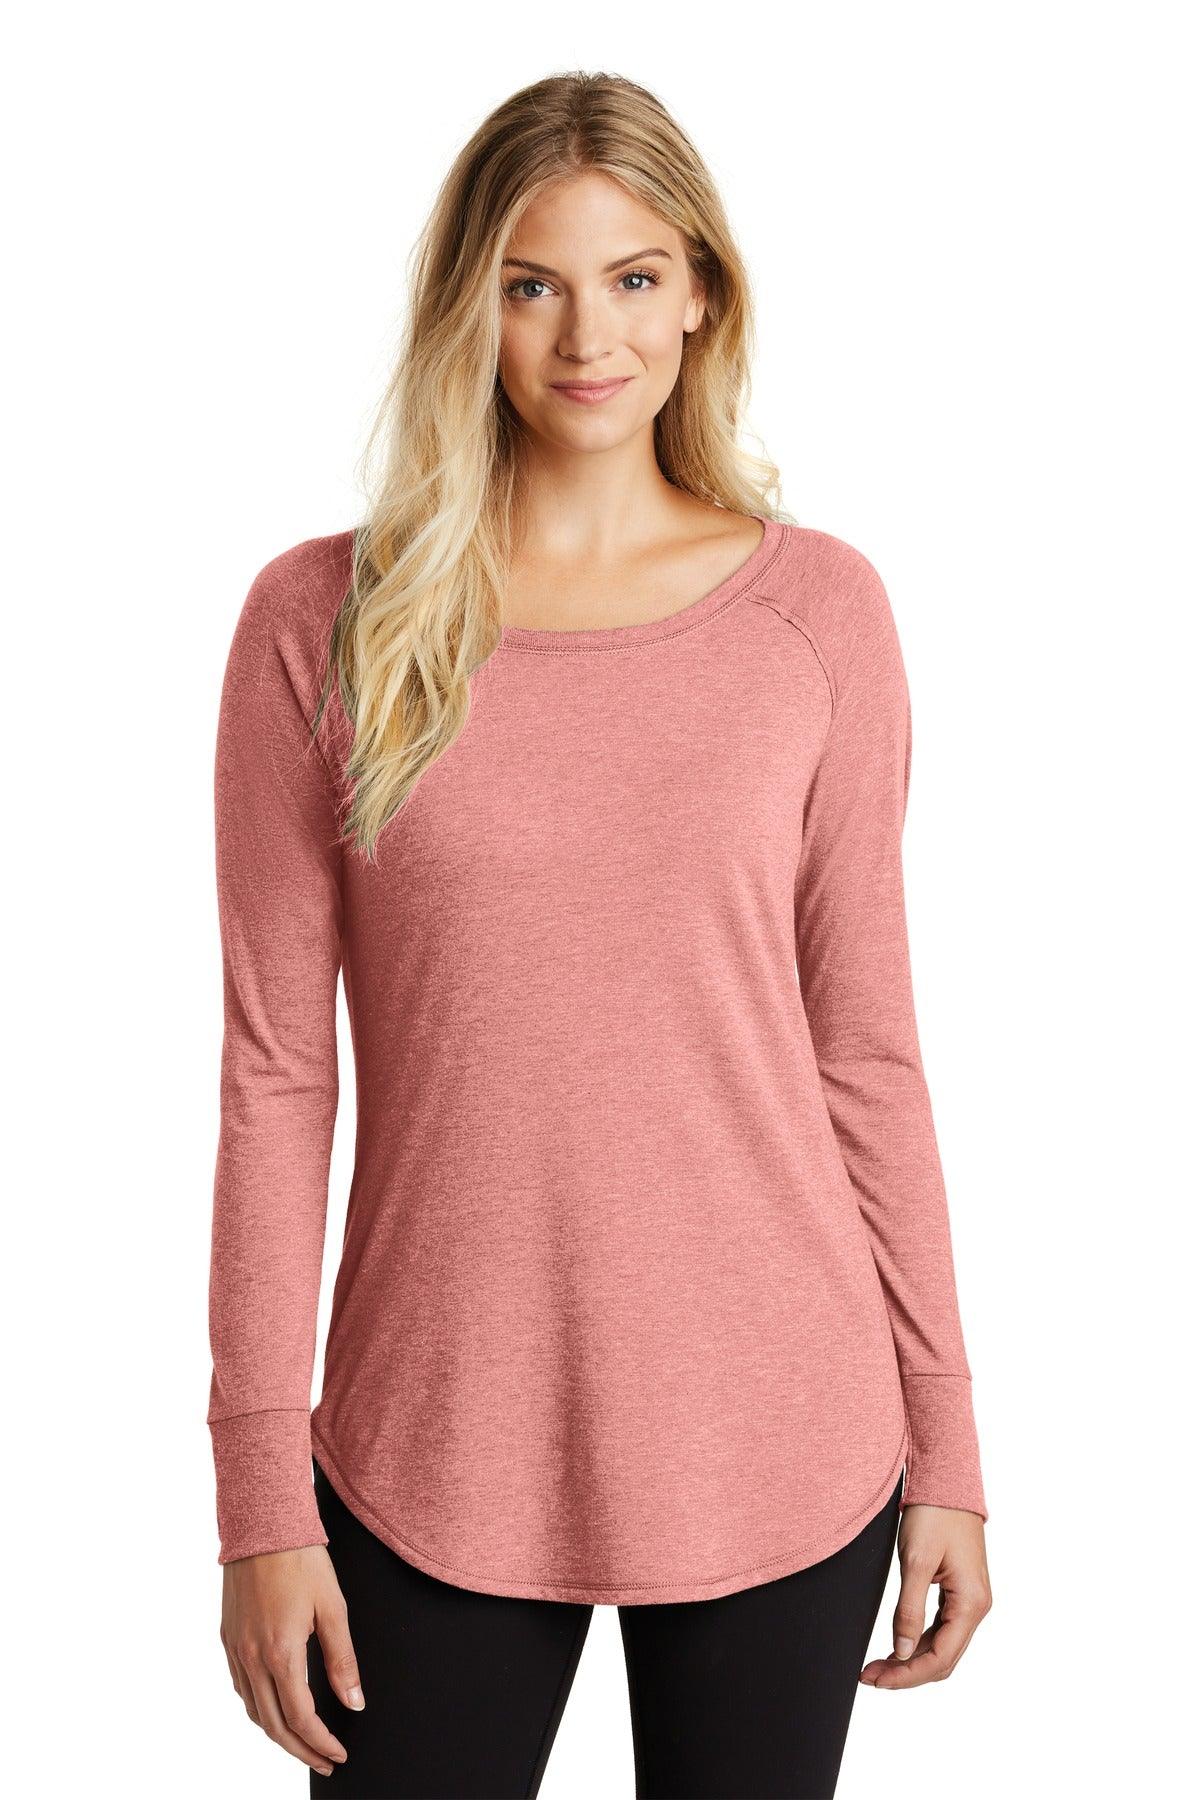 District Women's Perfect Tri Long Sleeve Tunic Tee. DT132L - Dresses Max